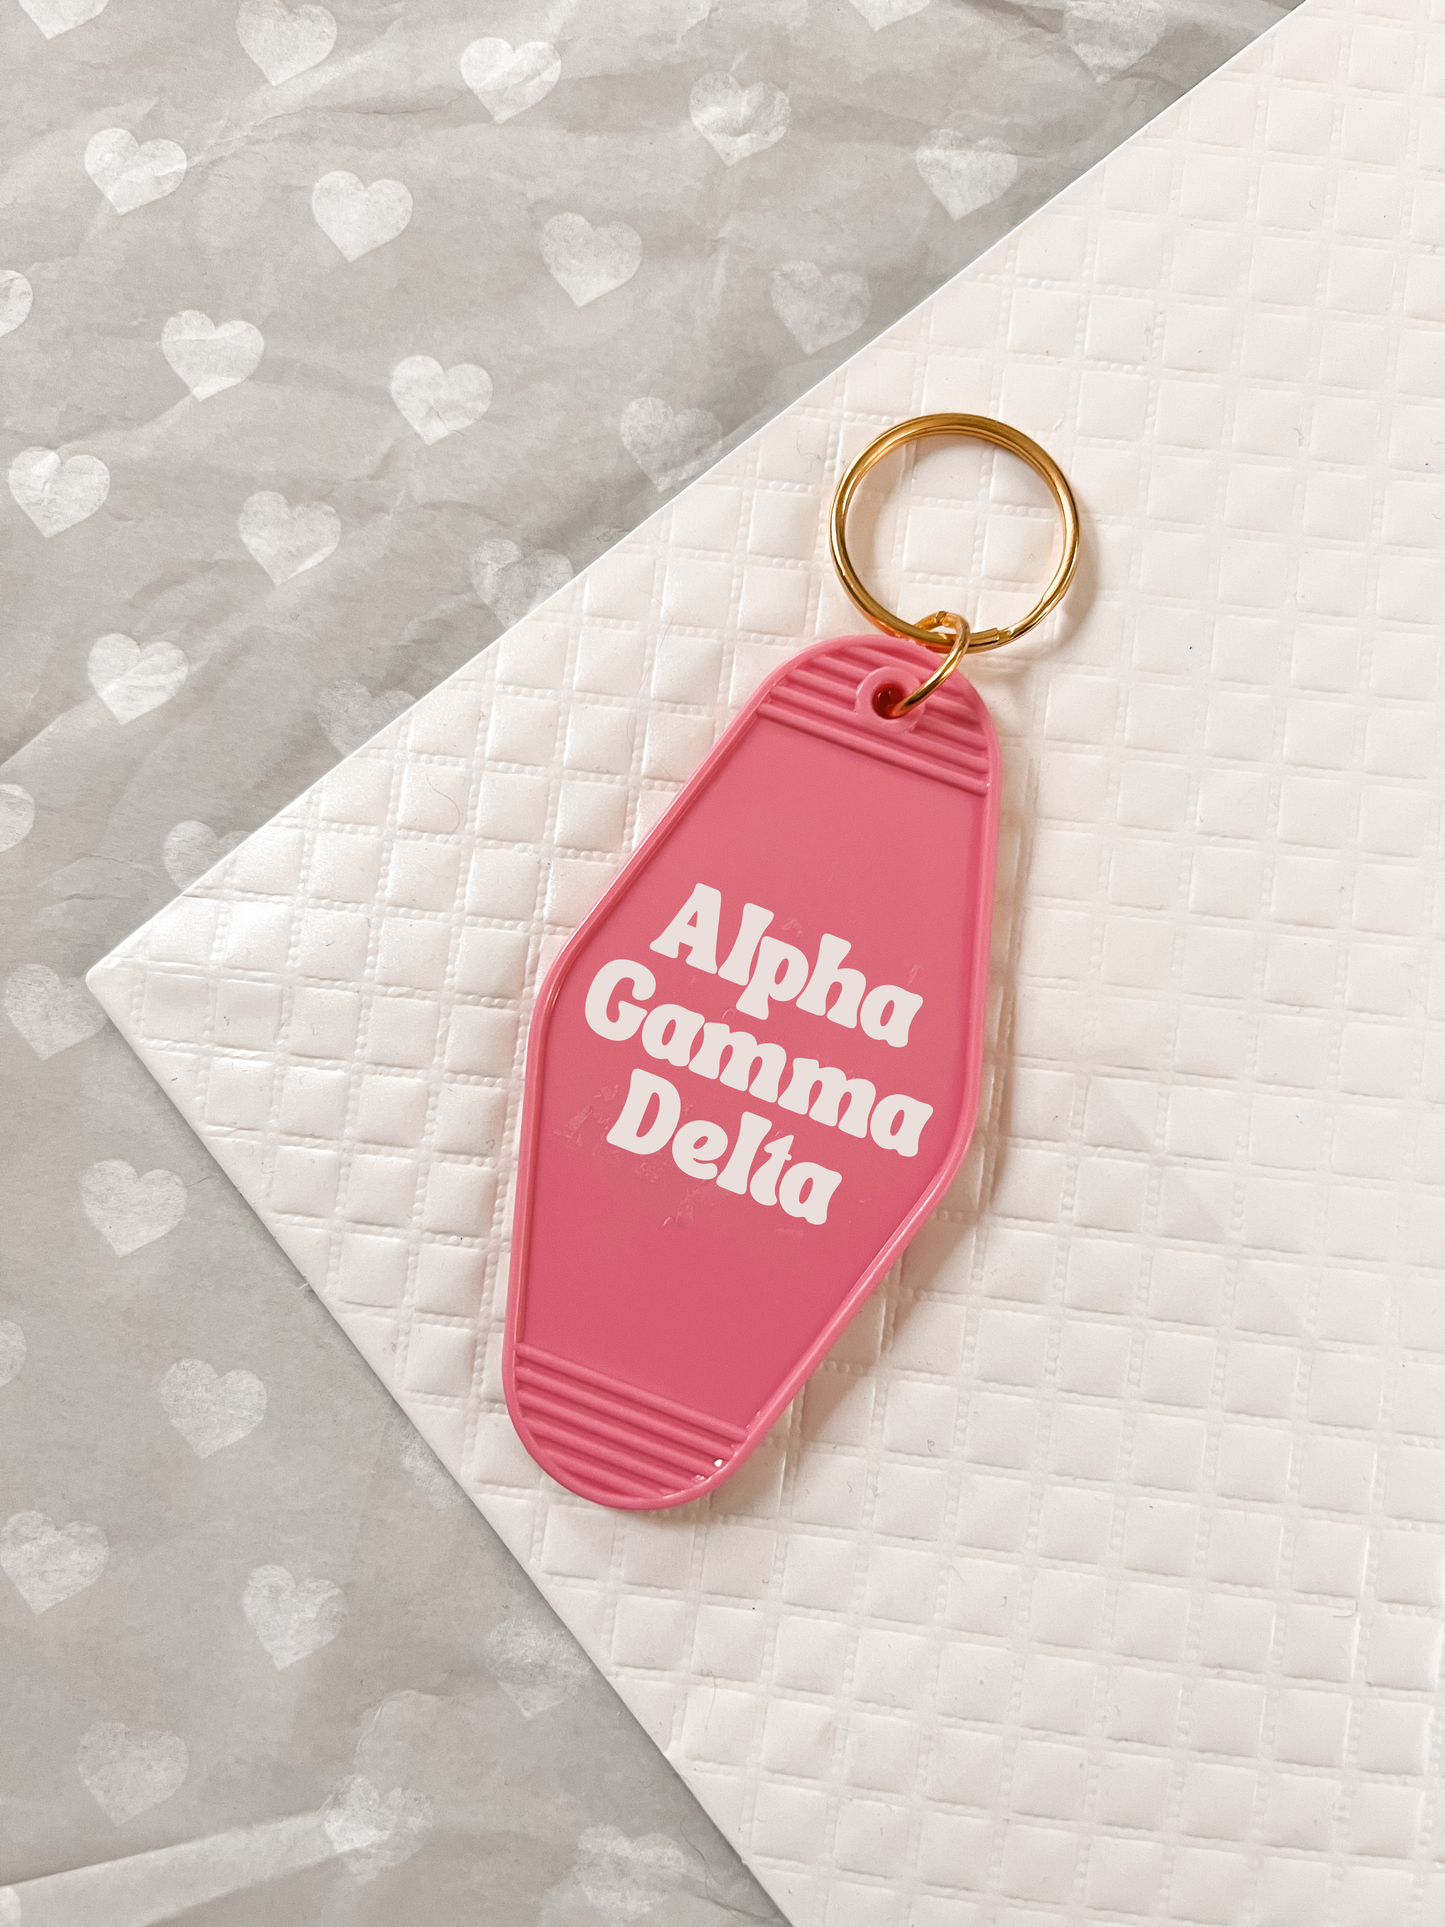 Alpha Gamma Delta Motel Hotel Key Chain in Hot pink with white letters and gold ring. AGD